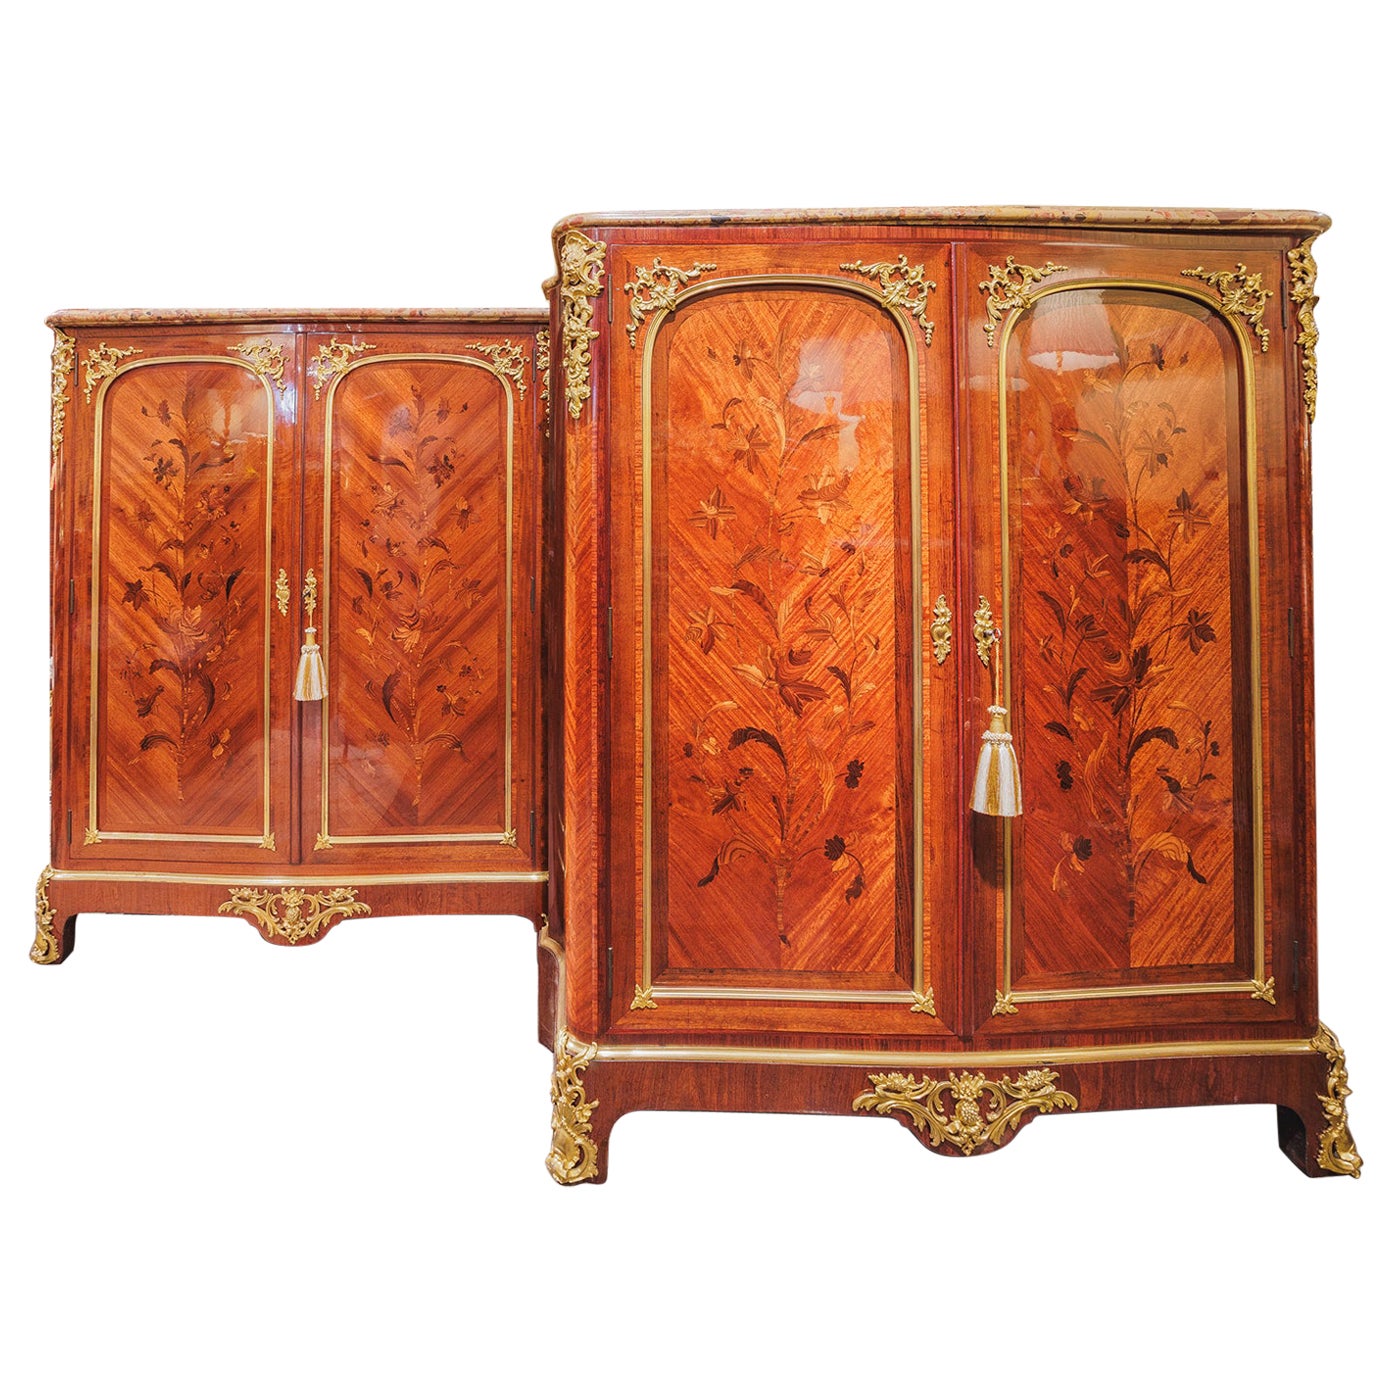 A fine pair of French 19th century cabinets by G. Durand 